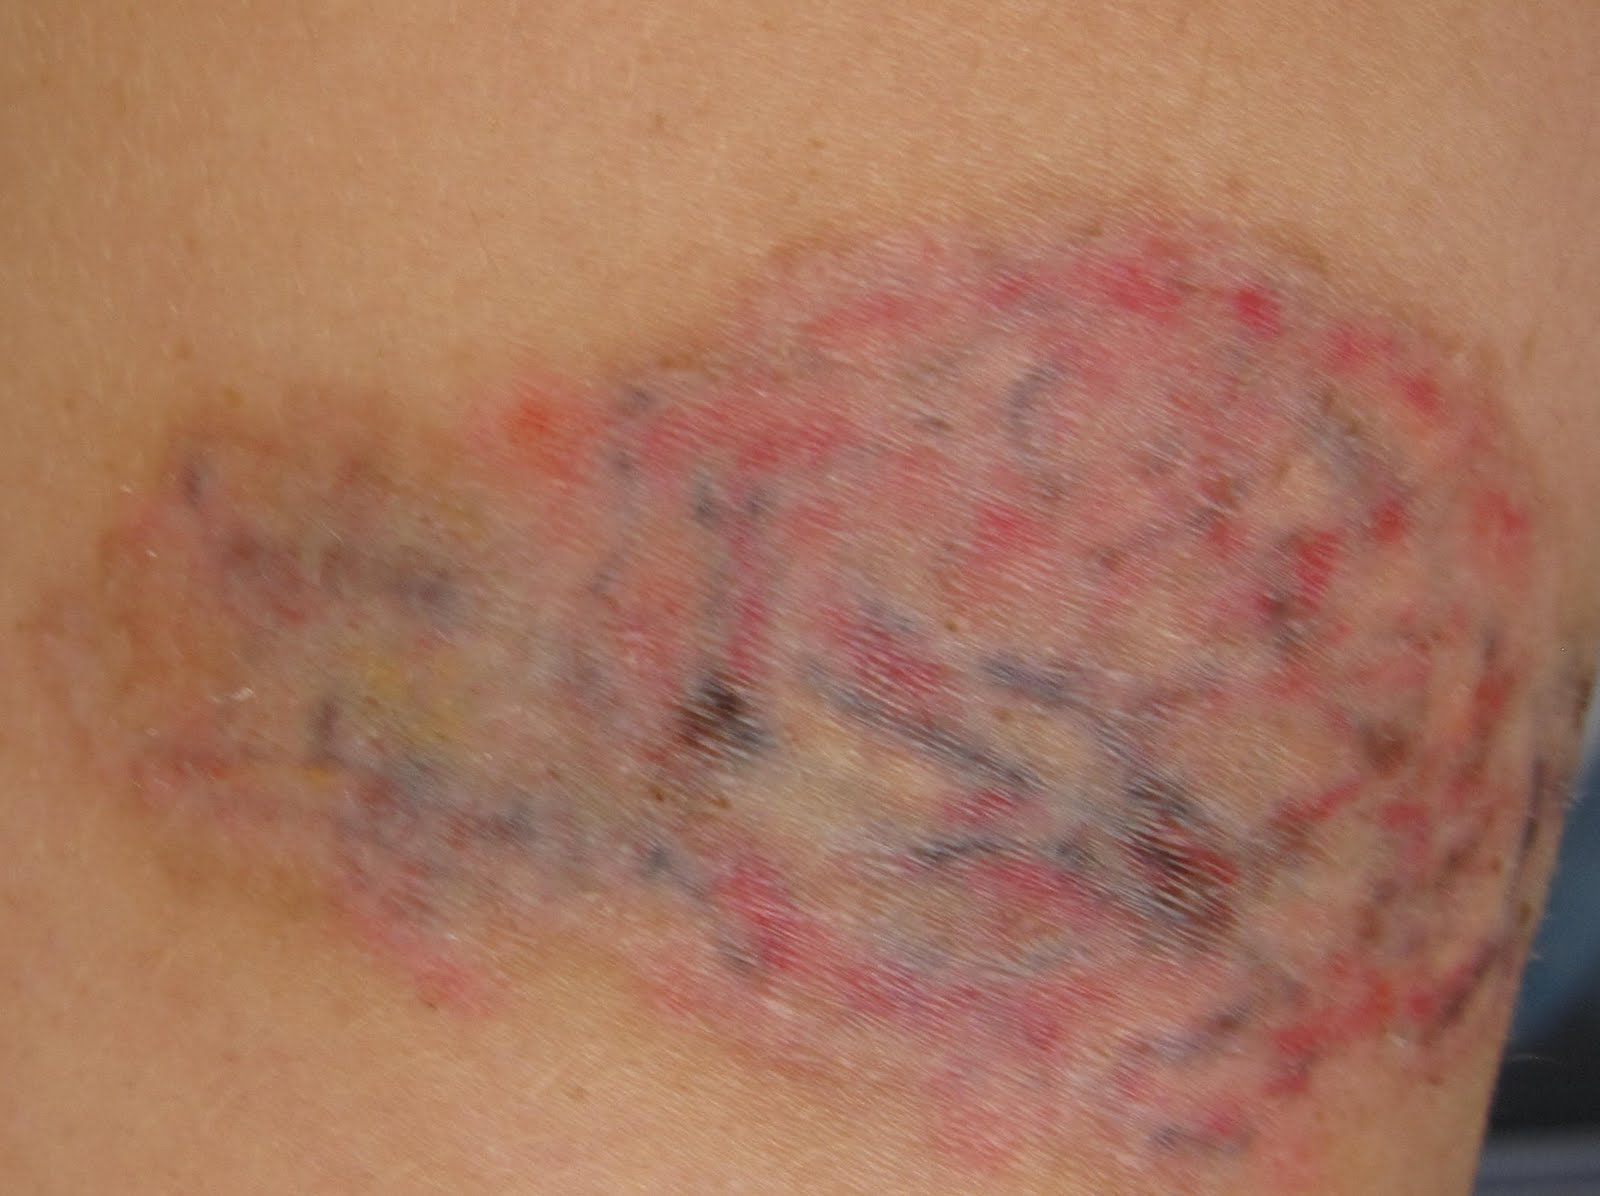 Chronicles of a Tattoo Removal: Bye, Bye Burn...